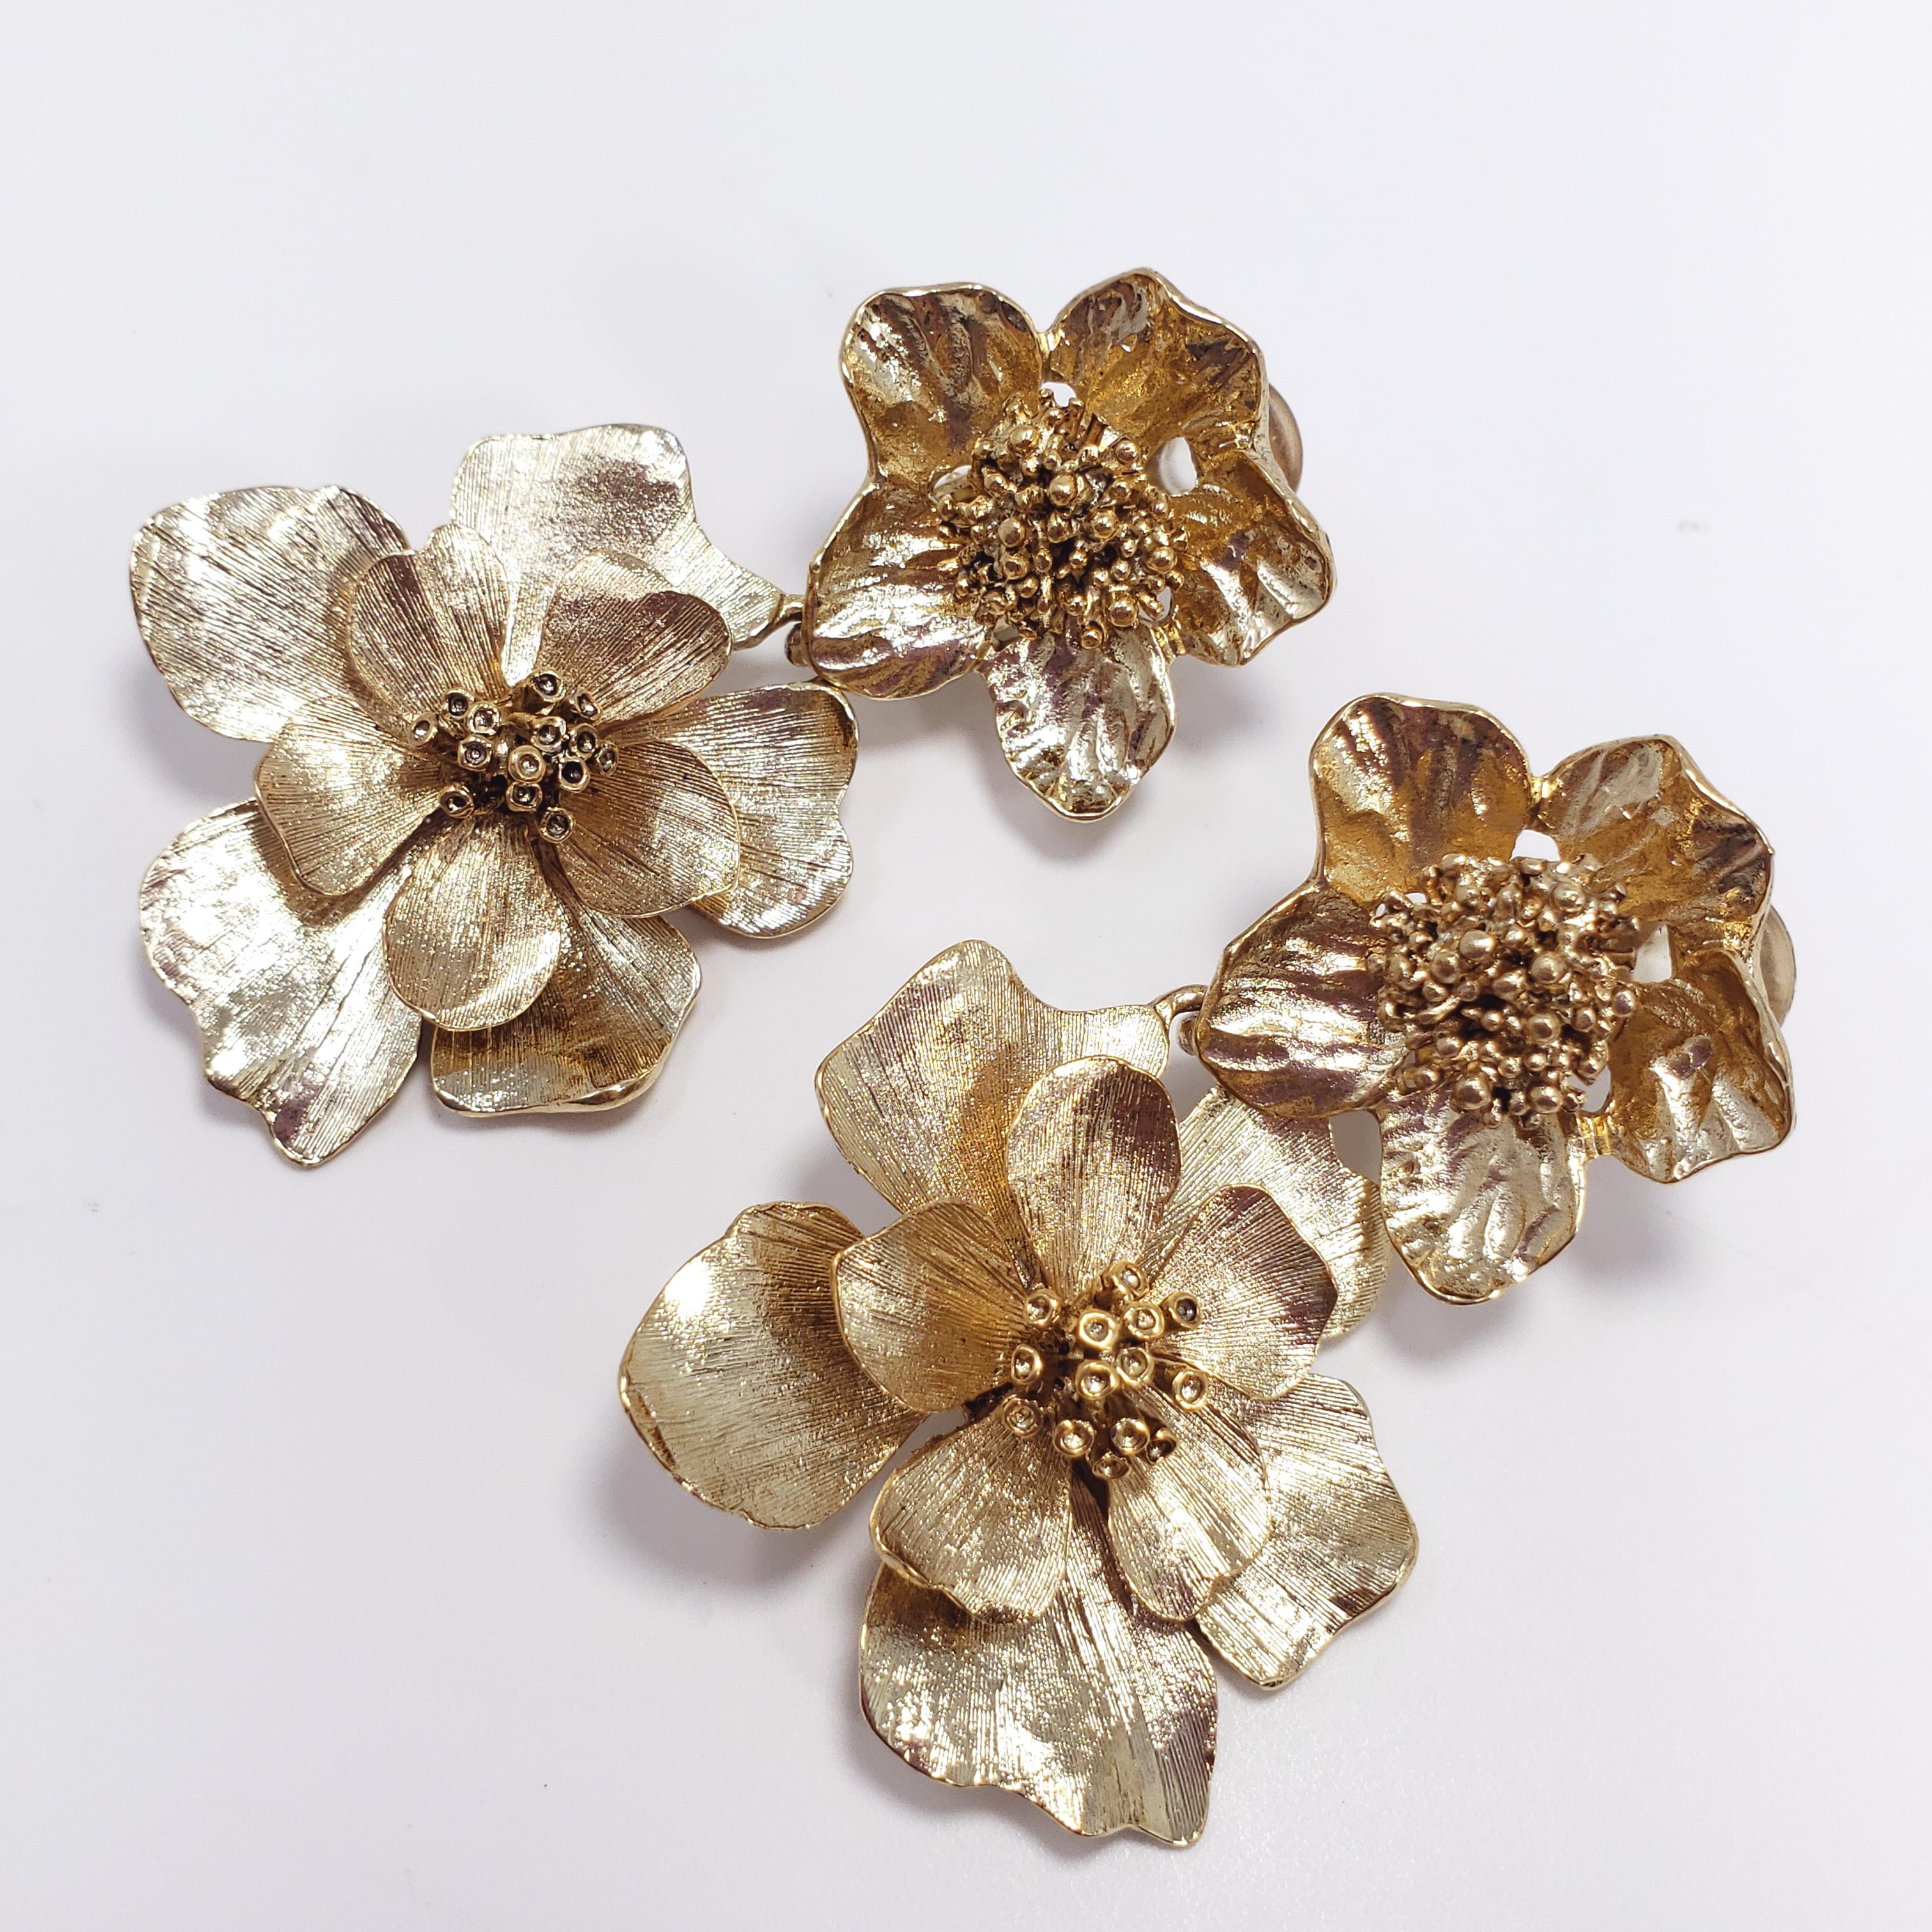 Loud and vibrant dangling clip-ons, featuring two dangling flowers on each earring, plated in 22K antique Russian gold. These Oscar de la Renta gold bold flower earrings definitely live up to their name!

6.5cm in length. The larger flower motif is